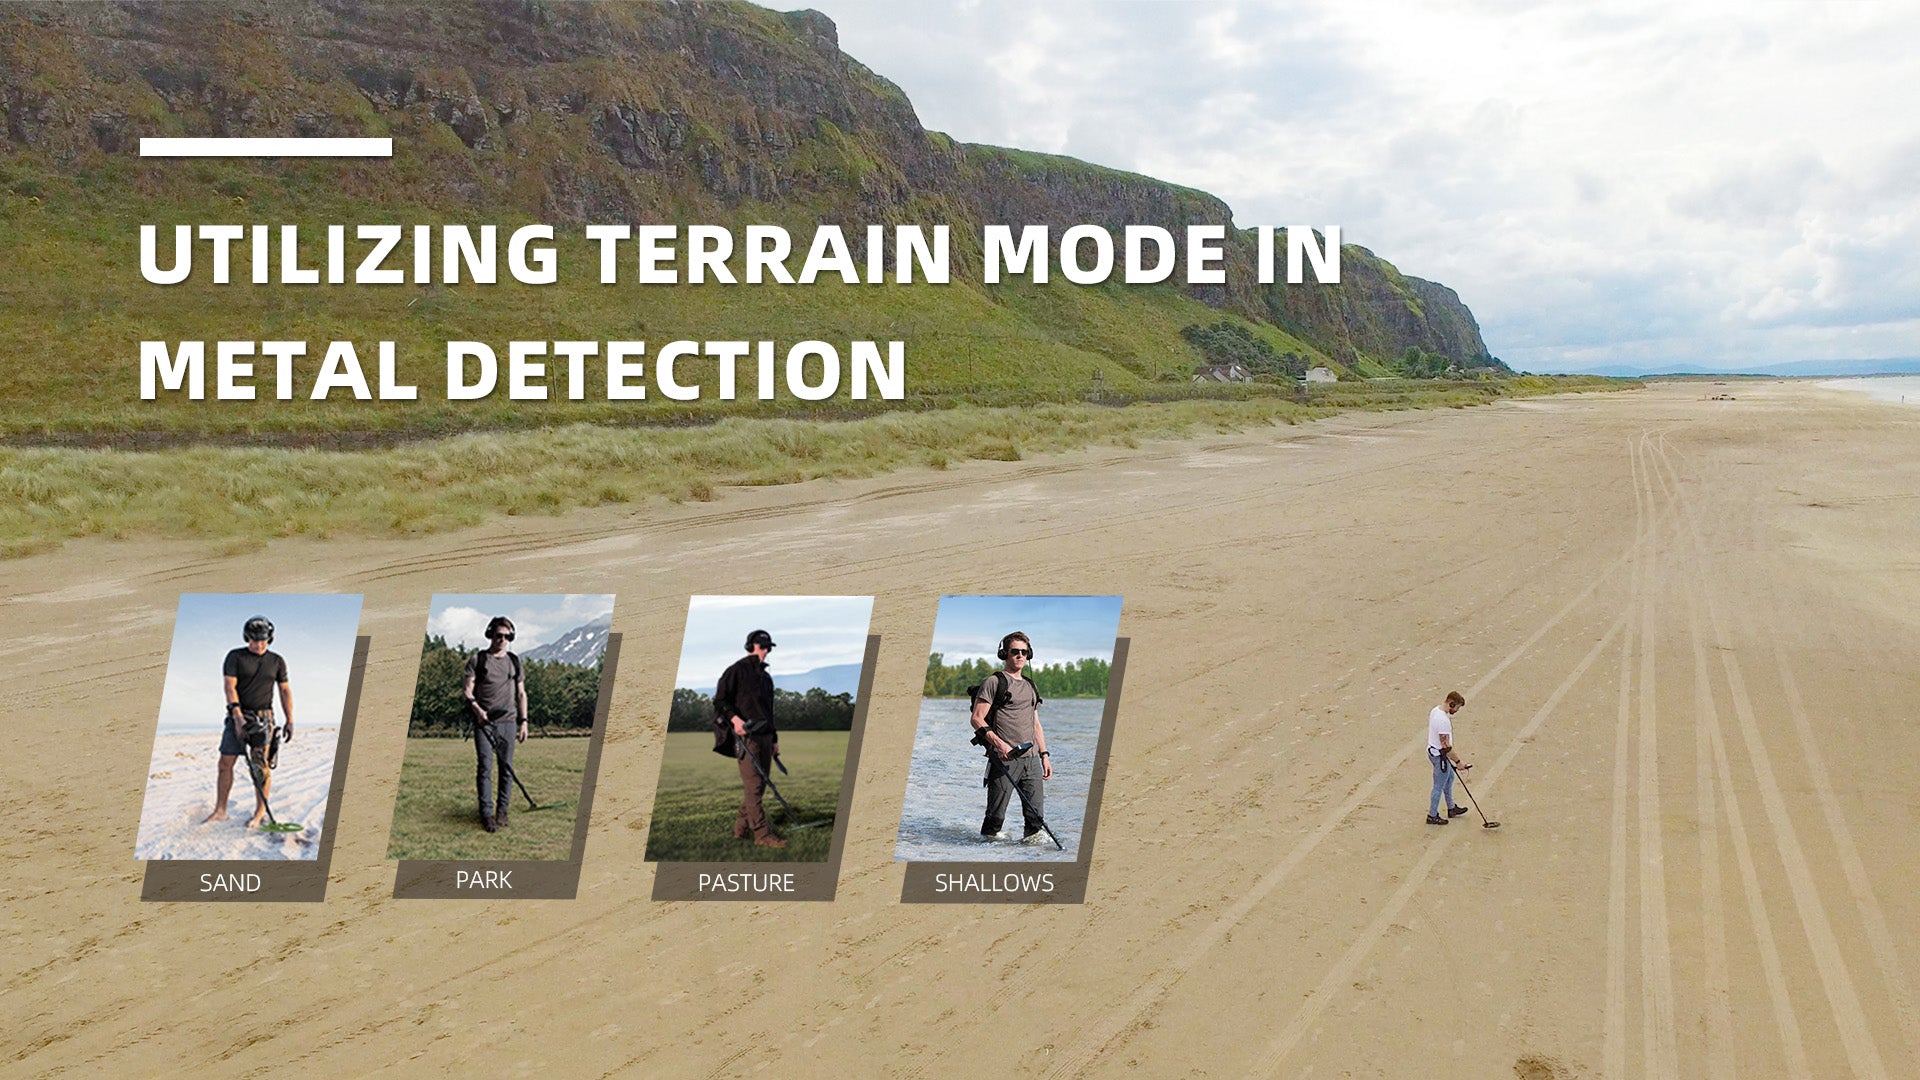 An informative graphic about metal detecting in different terrains